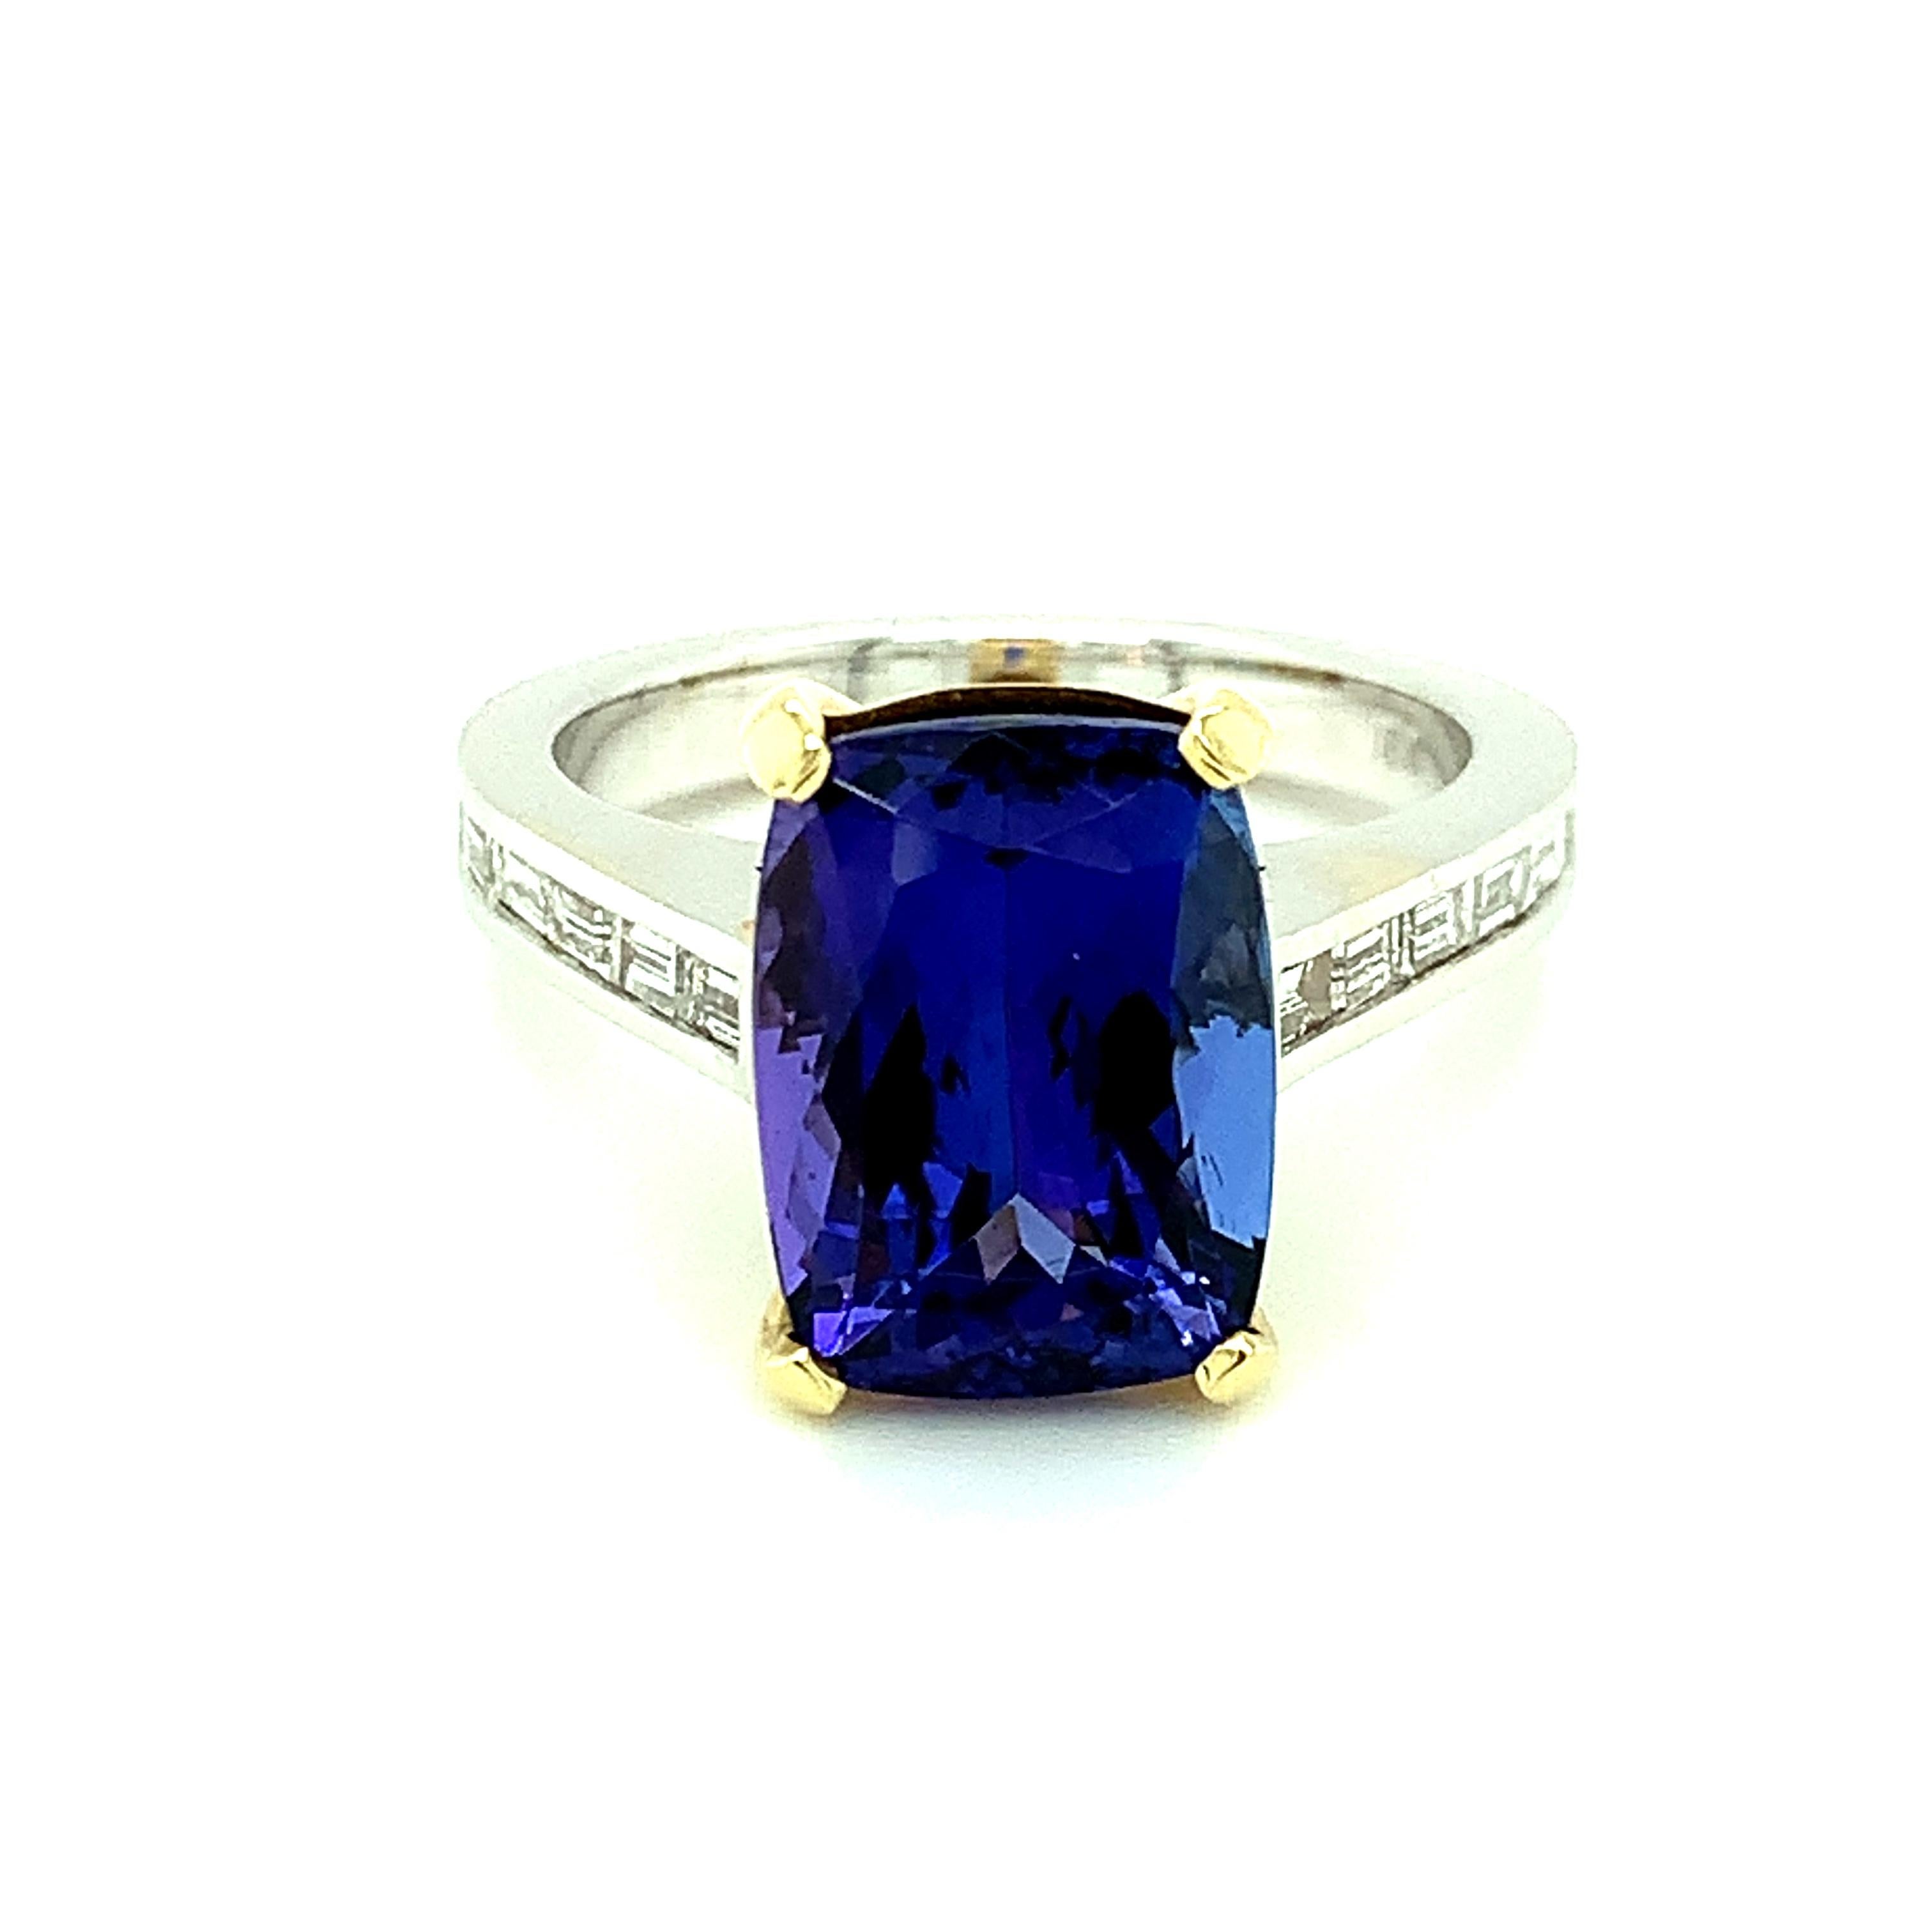 This handsome, contemporary, fine gemstone ring features a 5.35 carat richly colored, bluish violet tanzanite  weighing 5.35 carats! The tanzanite is a slightly elongated cushion shape, giving it a very elegant appearance. This design, part of our